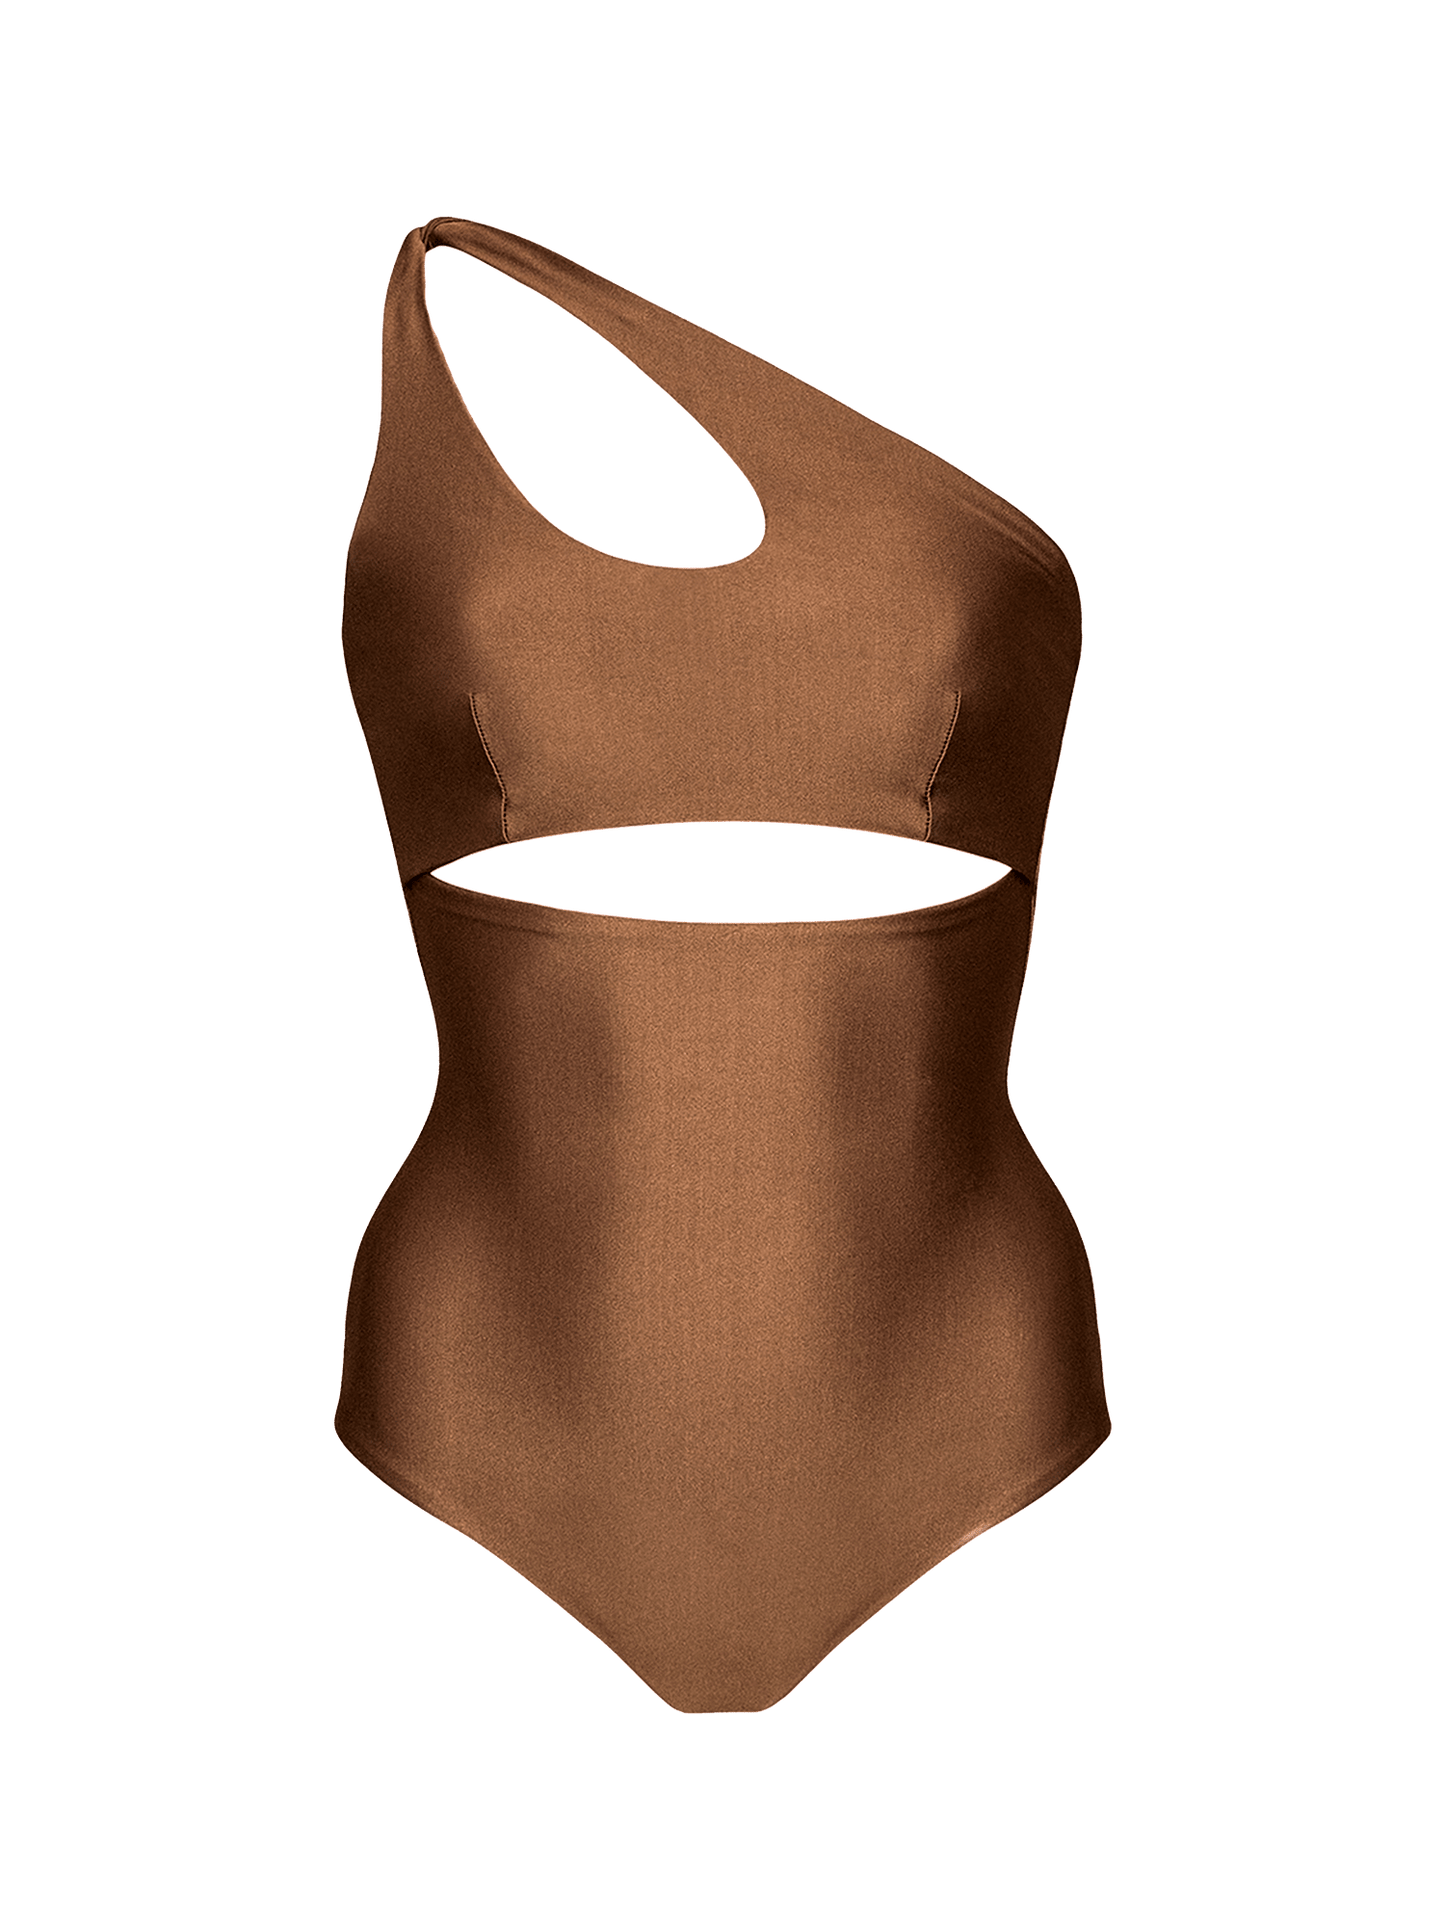 Second Skin|Shimmer ~ Asymmetric Cut-out One Piece - Spice Bronze